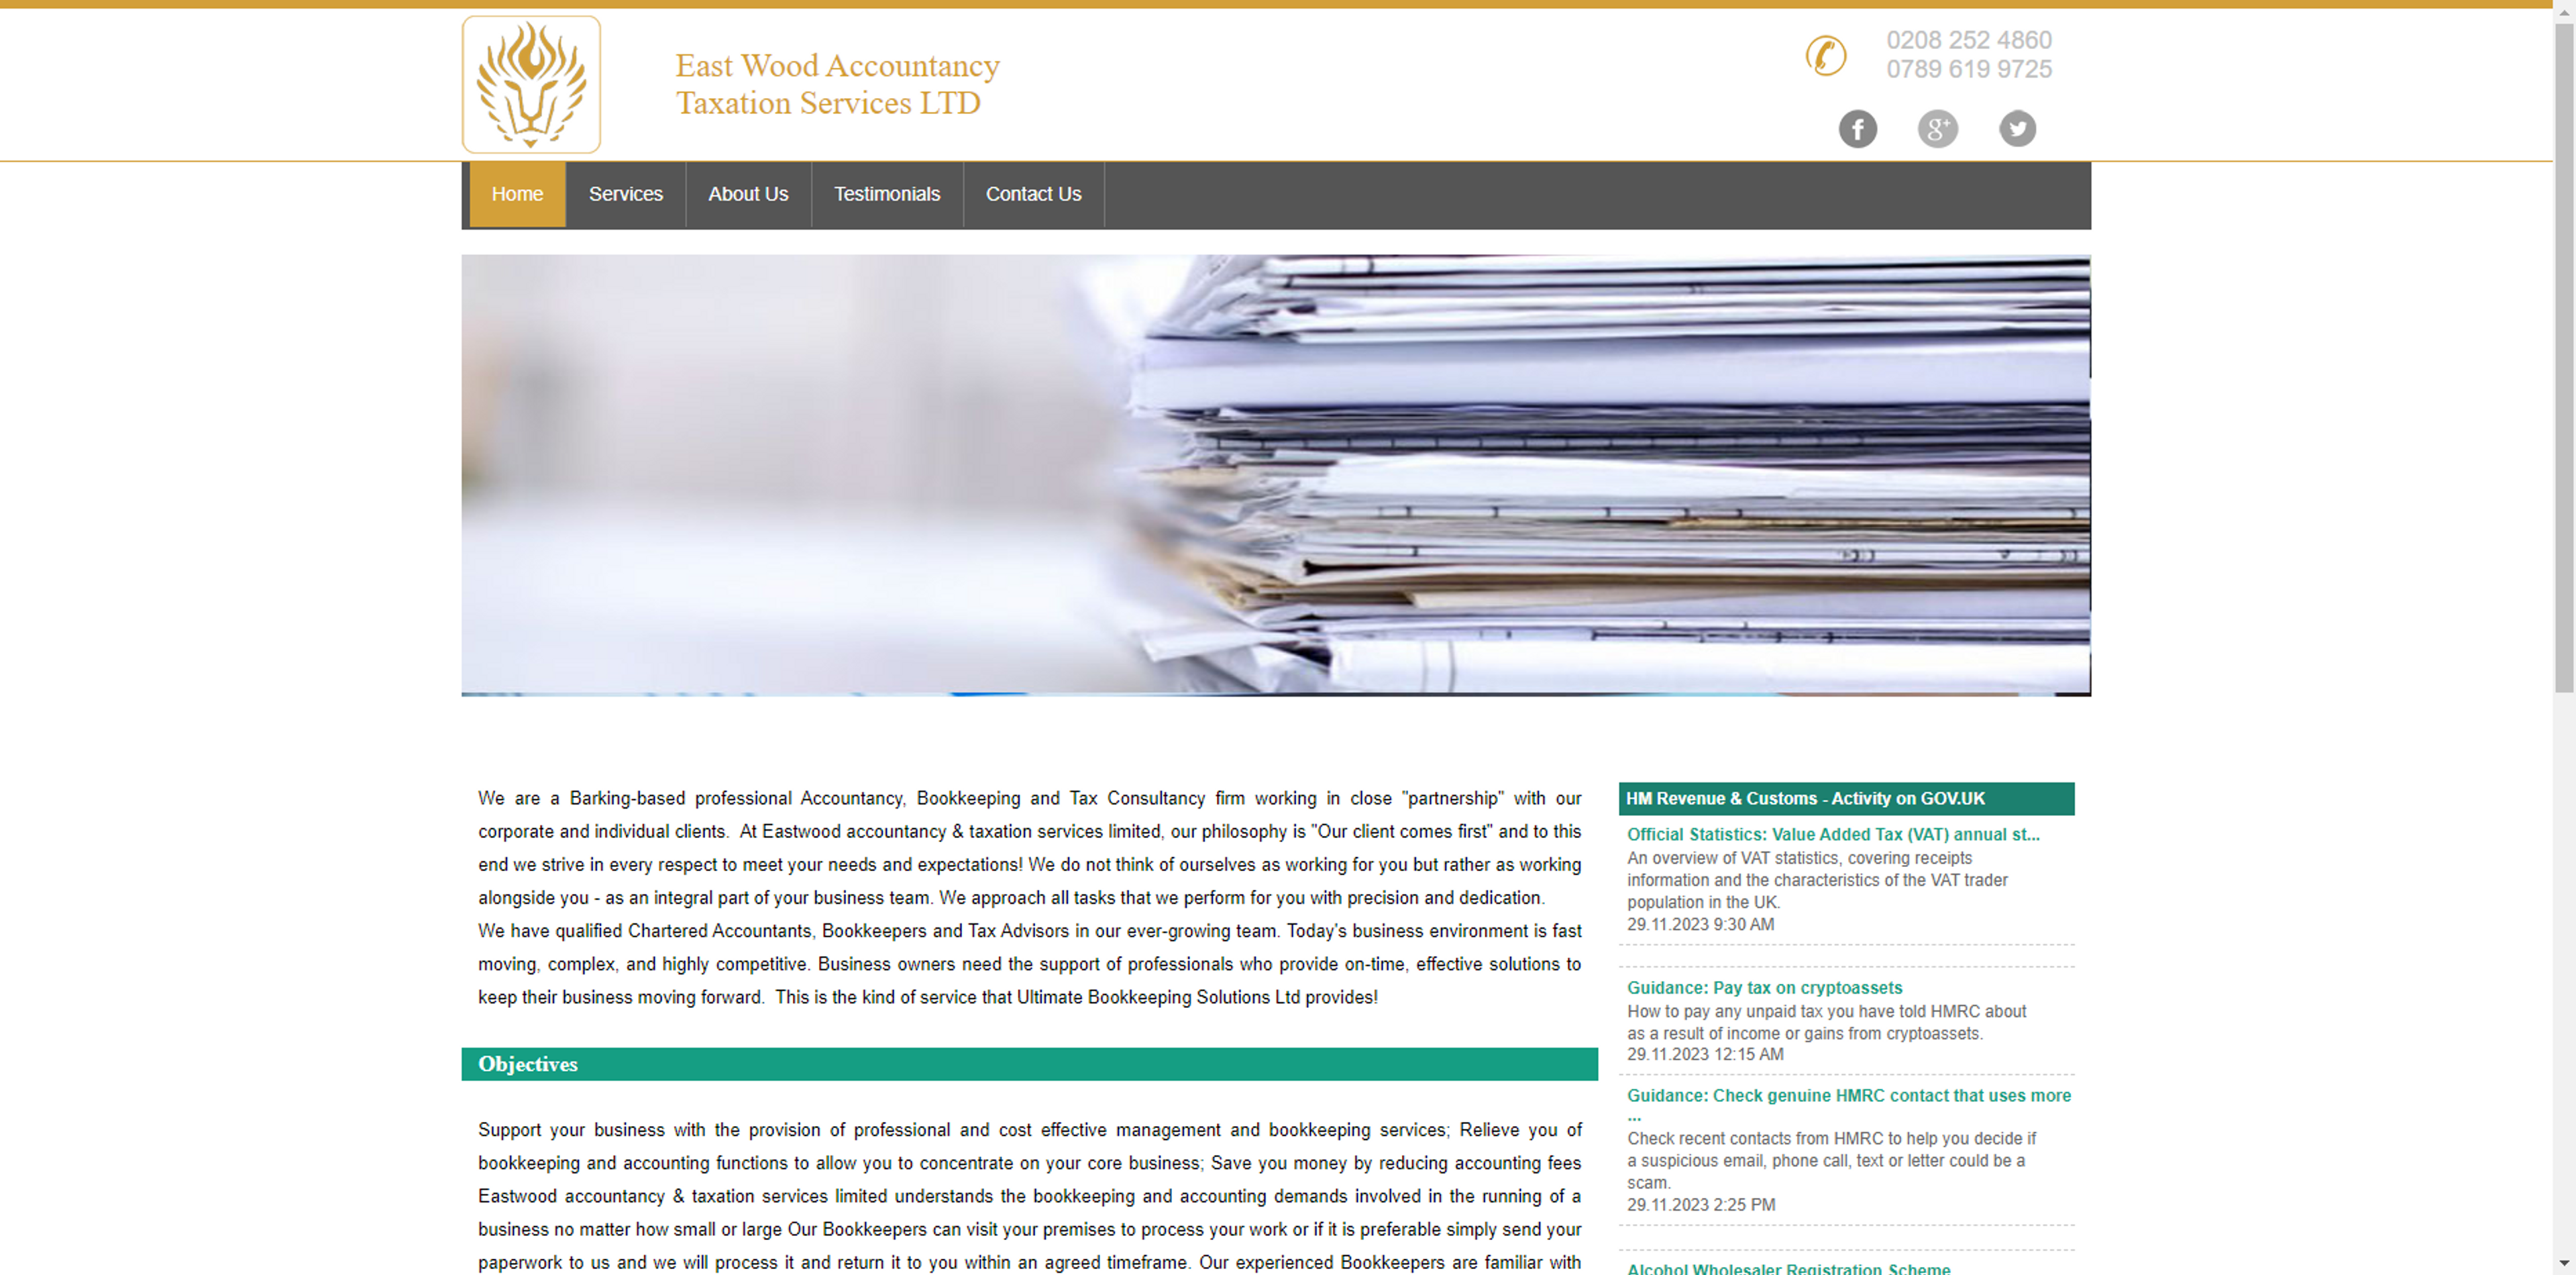 Screenshot of East Wood Accountancy Taxation's old site showing off their hero section and some text